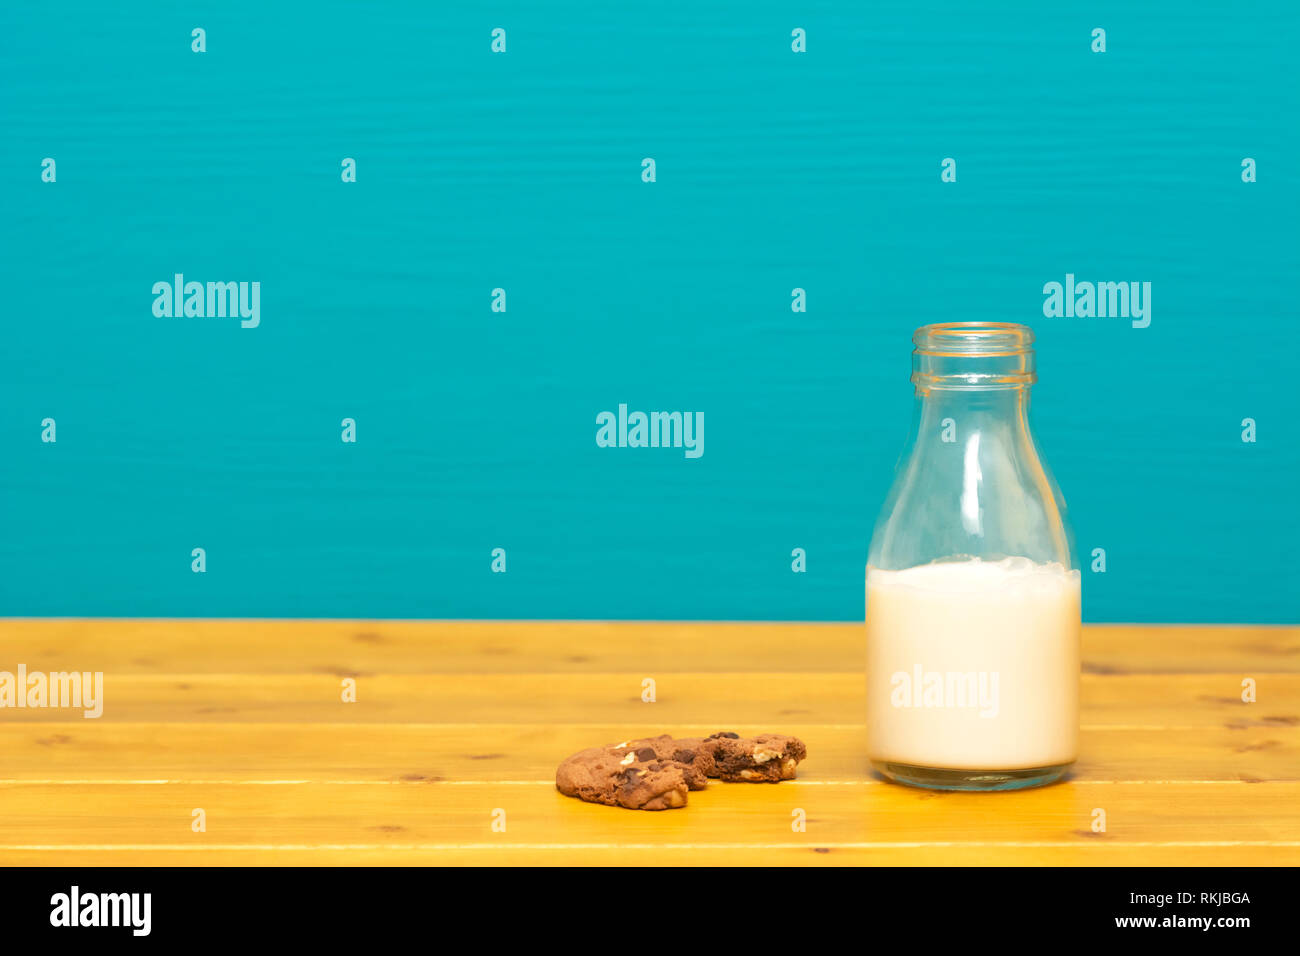 One-third pint glass milk bottle half full with fresh creamy milk and a half-eaten chocolate chip cookie, on a wooden table against a teal background Stock Photo